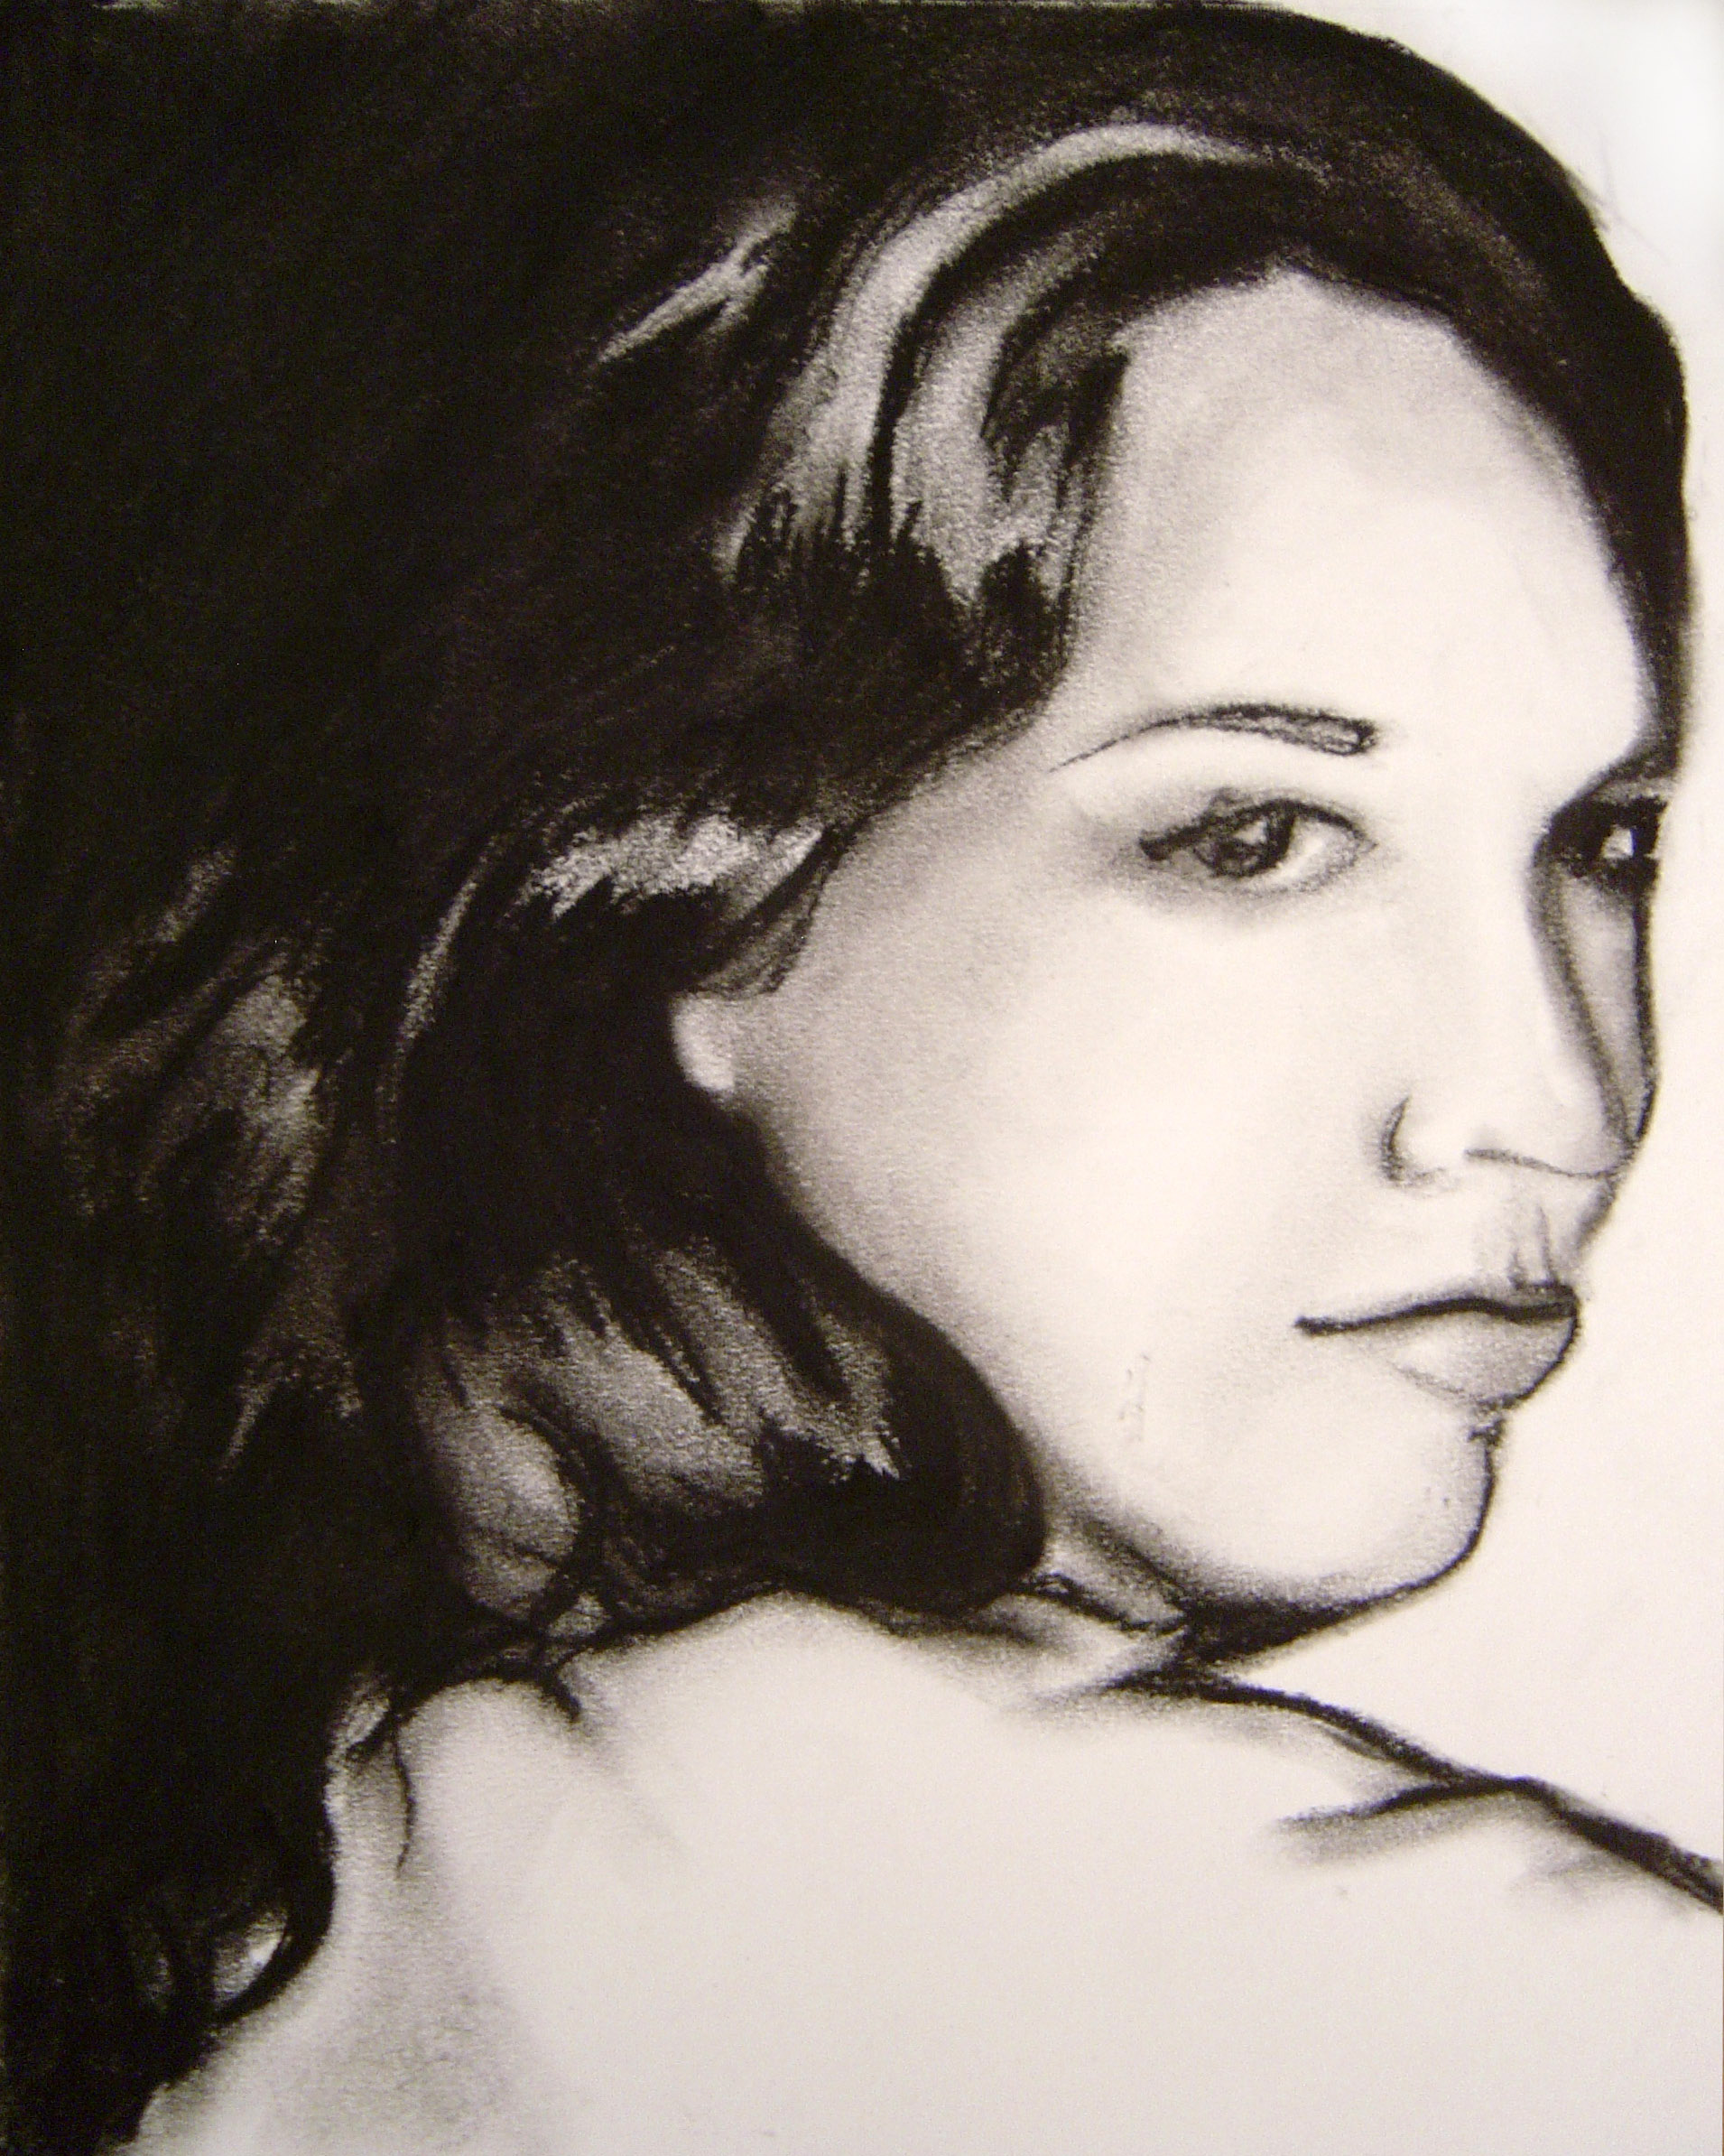 Charcoal sketch of a woman's face